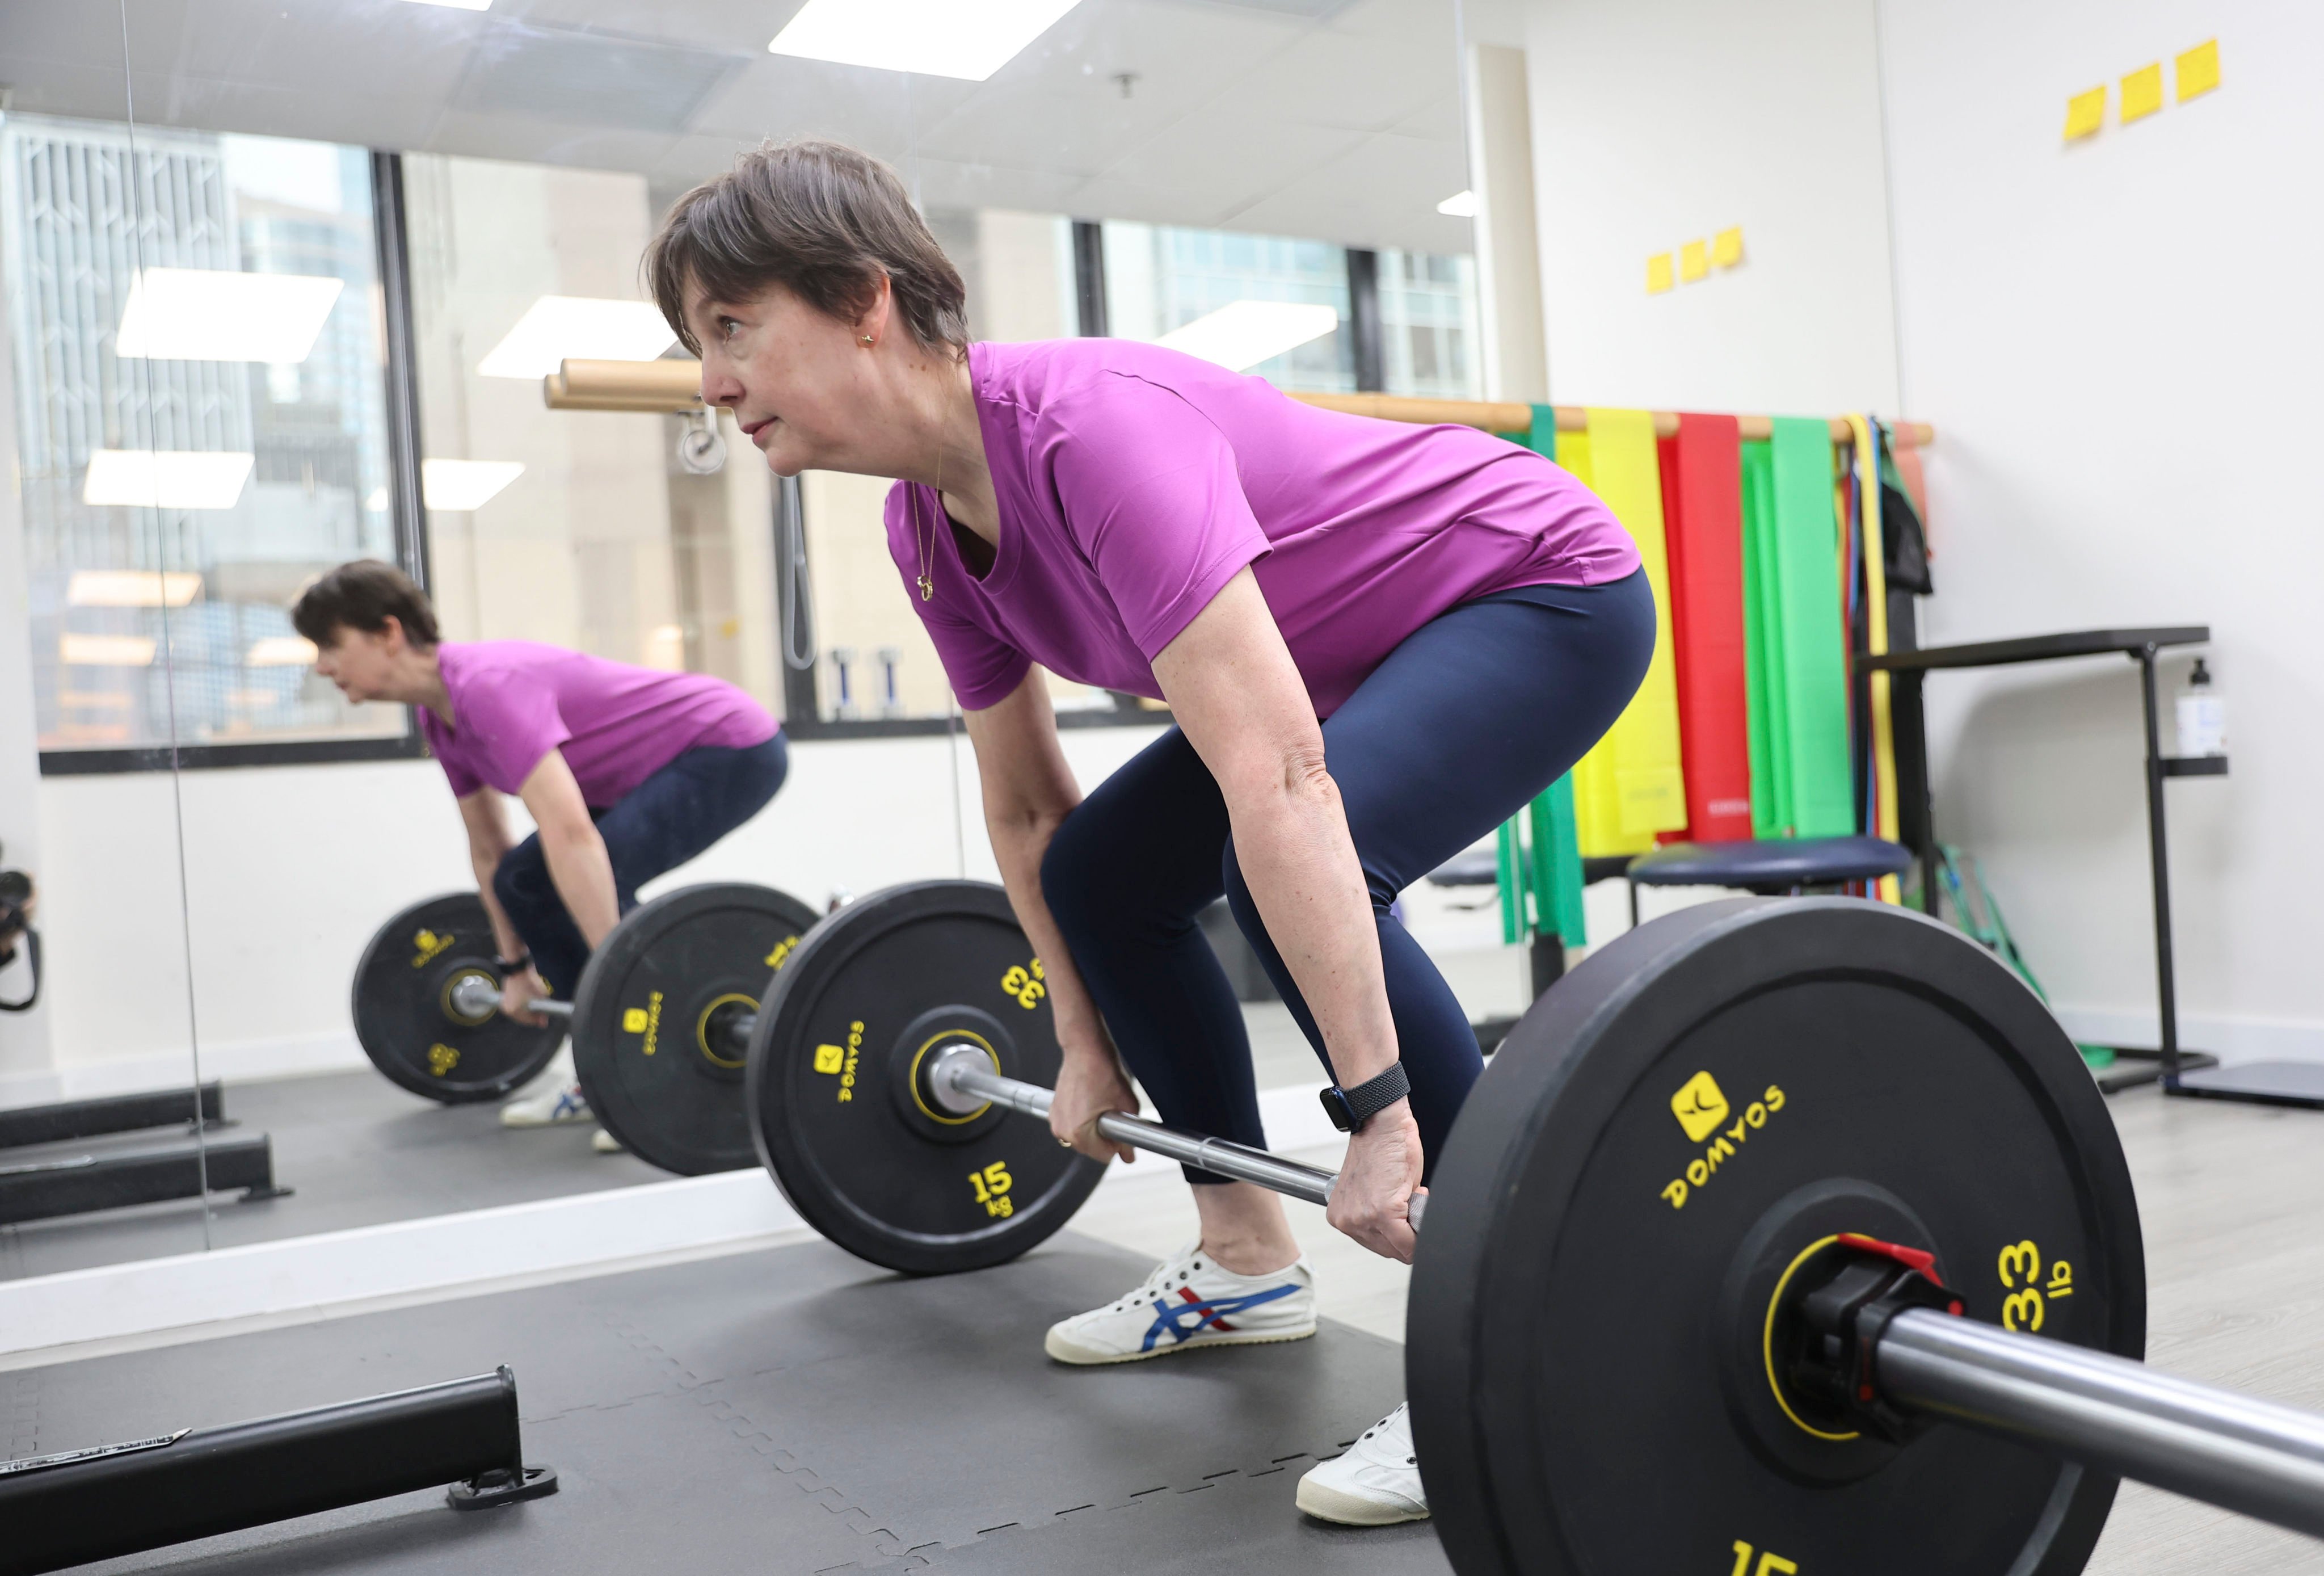 Physiotherapist Judith Anne Gould opened a clinic in Hong Kong dedicated to bone health after seeing a rising number of clients with osteoporosis and osteopenia. Photo: Edmond So 